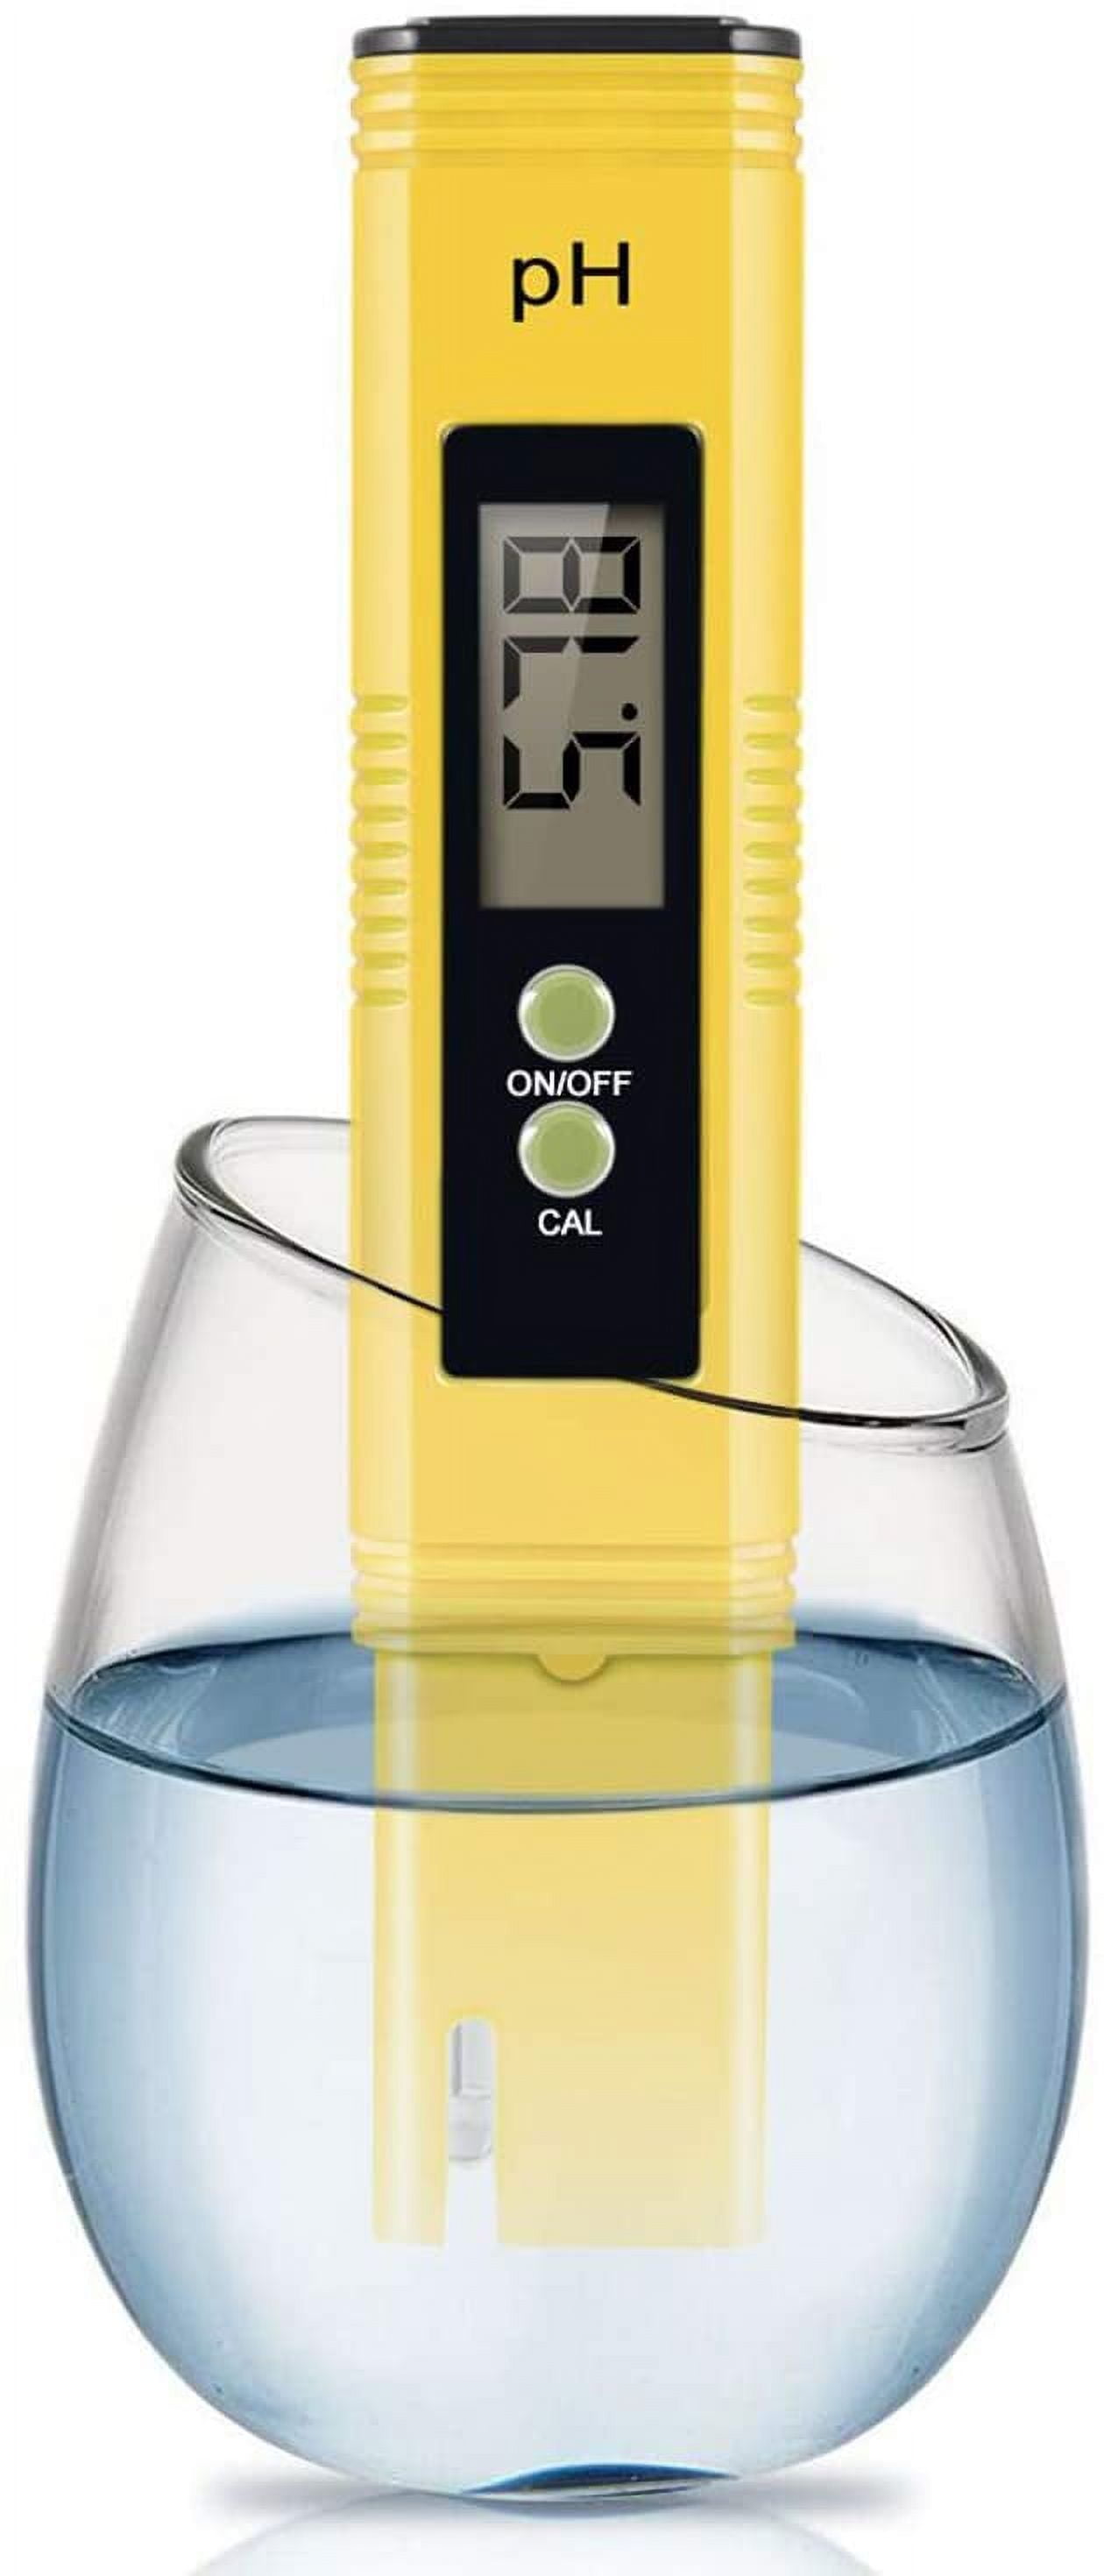 VIVOSUN 3-in-1 Digital pH Meter with ATC, ±0.1 pH Accuracy Water Quality  Tester, 0-14.0 pH Measurement Range for Hydroponics, Household Drinking,  Pool